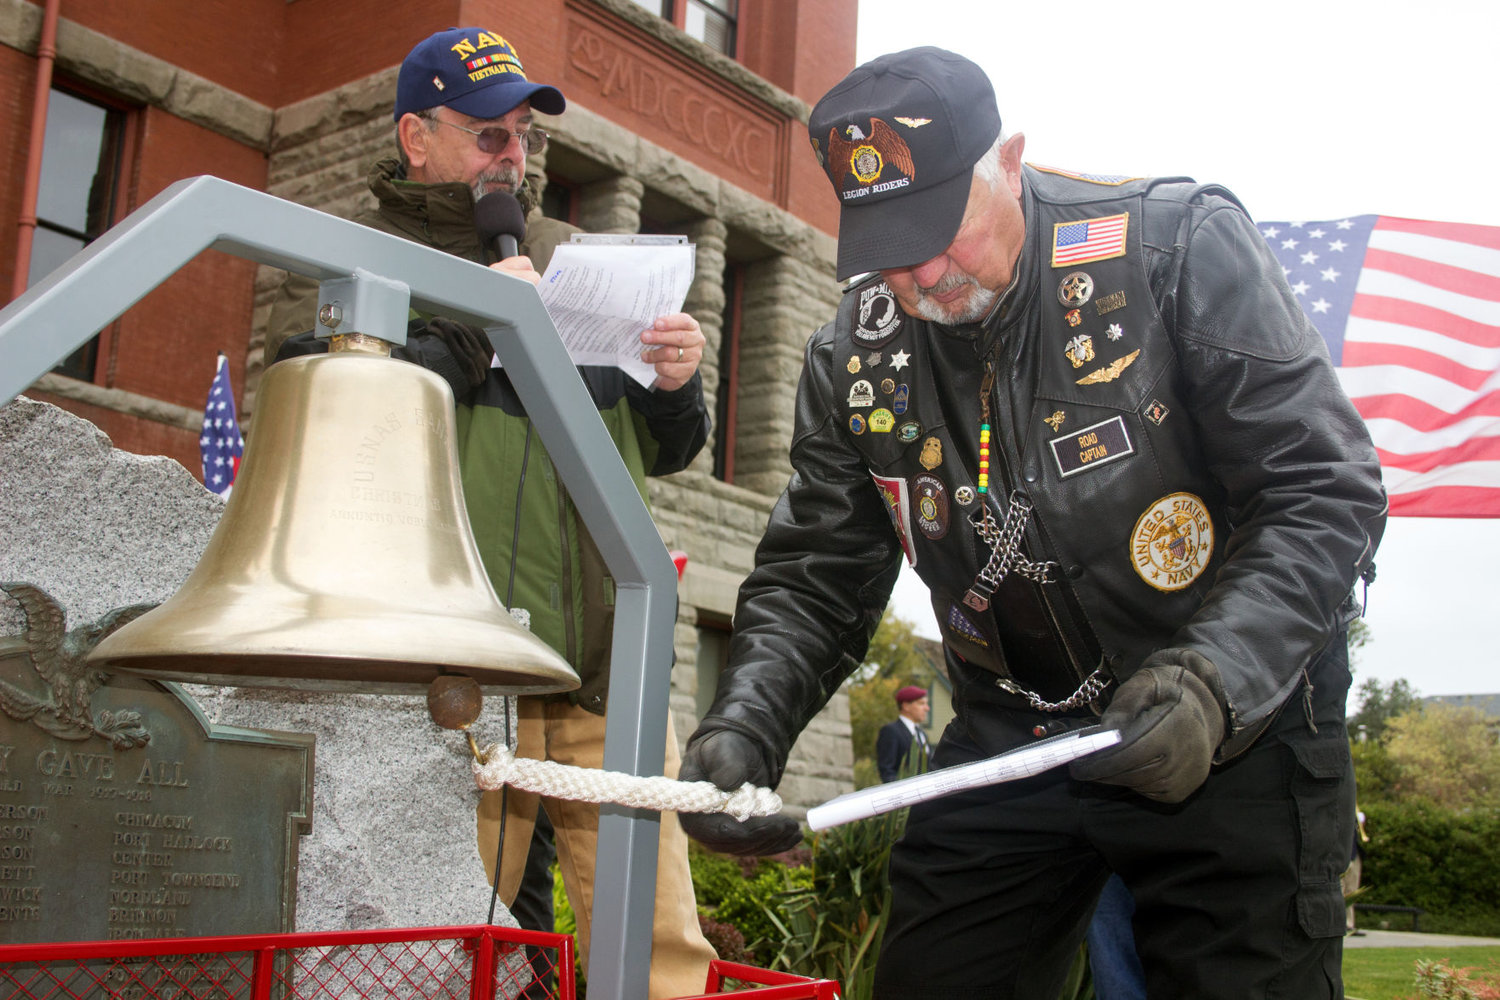 Steve Brunette reads the names of 32 Jefferson County veterans who have died in the past six months, while Gary Velie rings the bell for each name at the Jefferson County Courthouse Oct. 21. Photos by Kirk Boxleitner